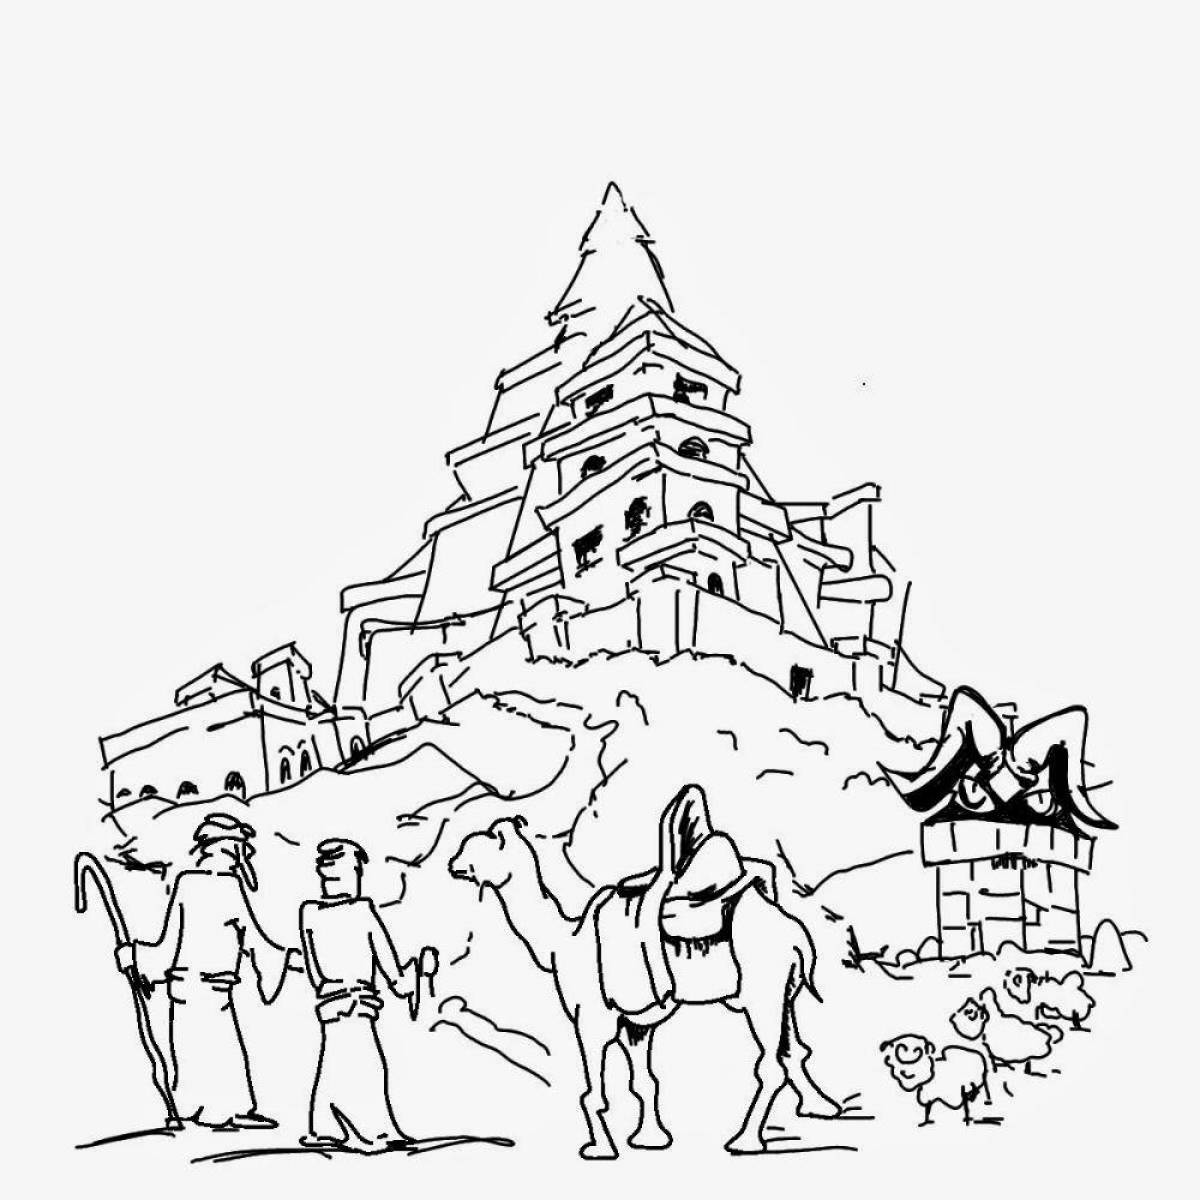 Great tower of Babel coloring book